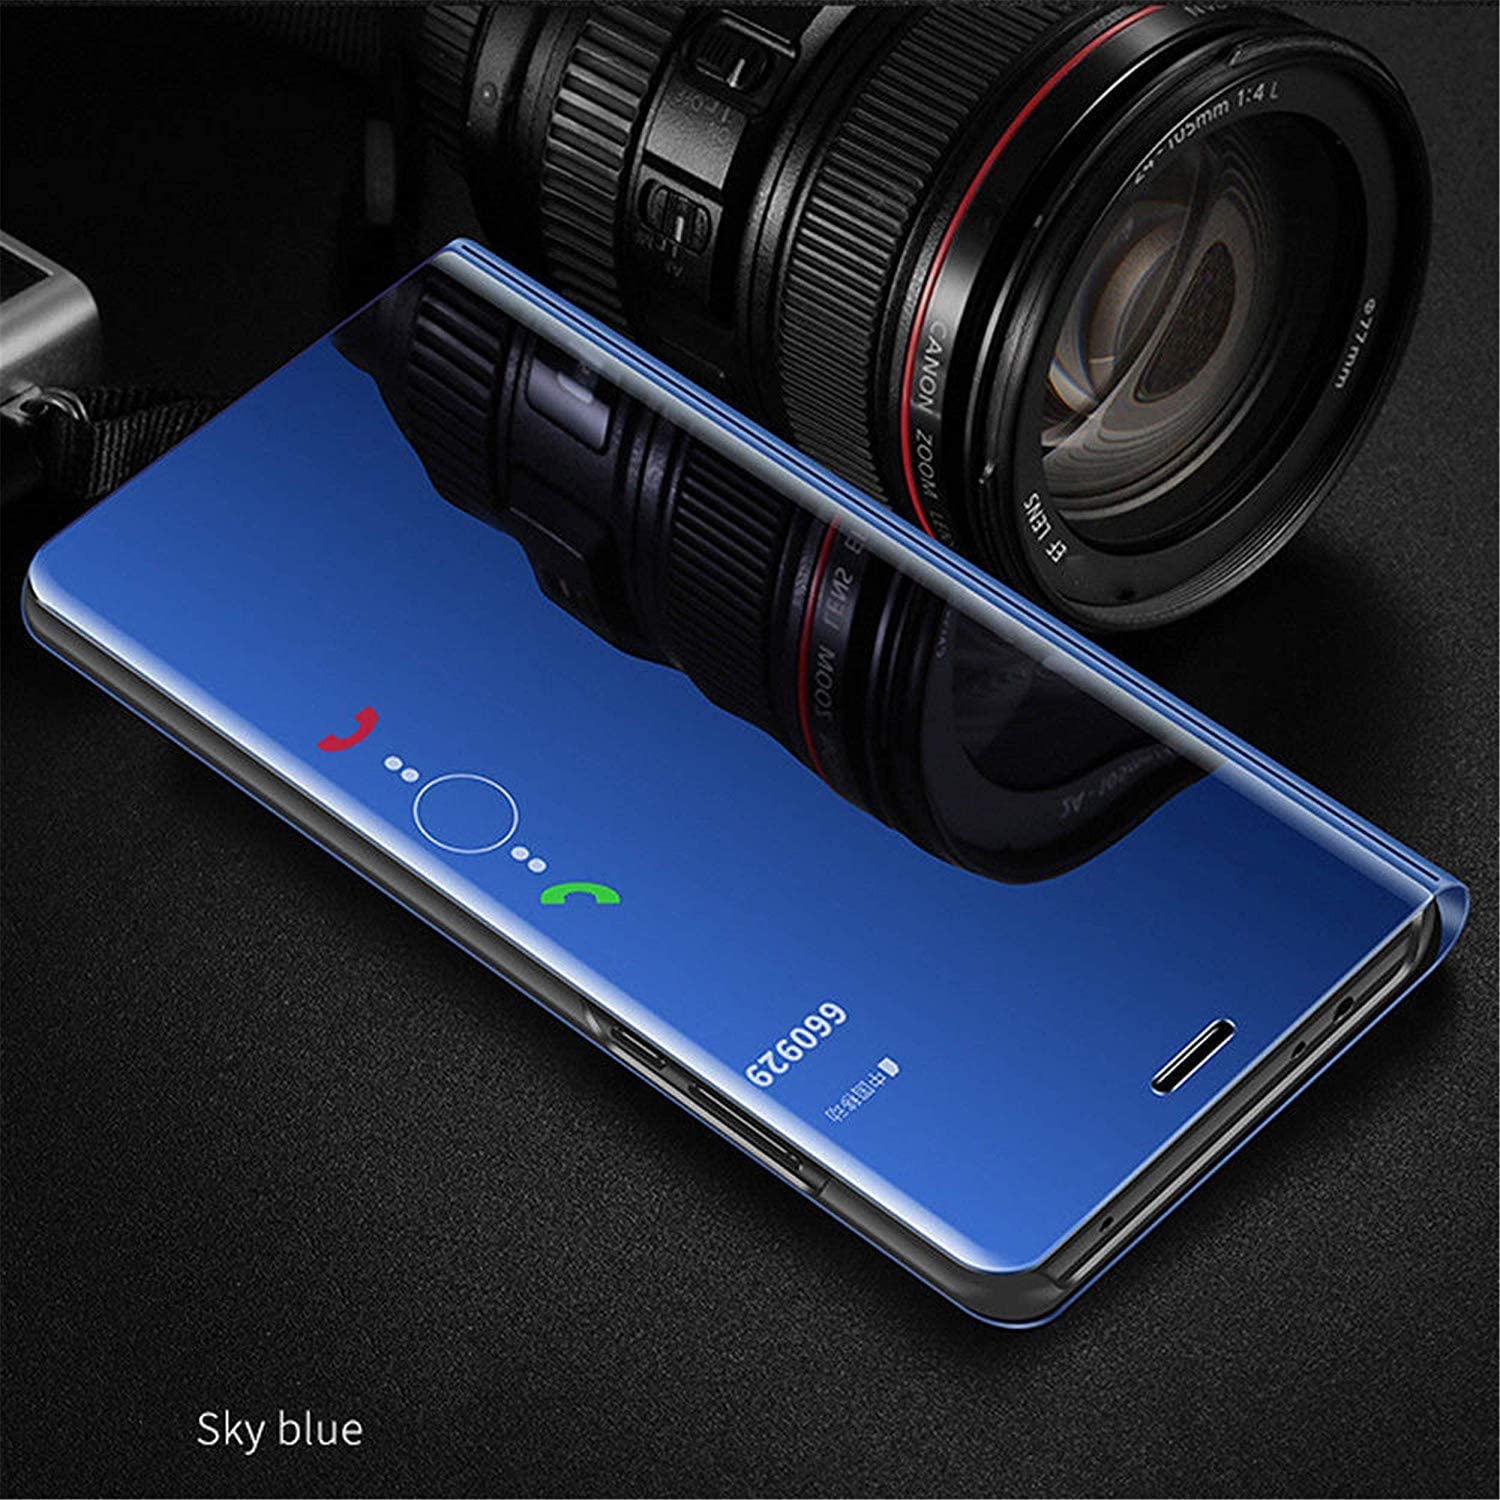 Samsung Galaxy S8 Plus Mobile Phone Case Mirror Protective Cover